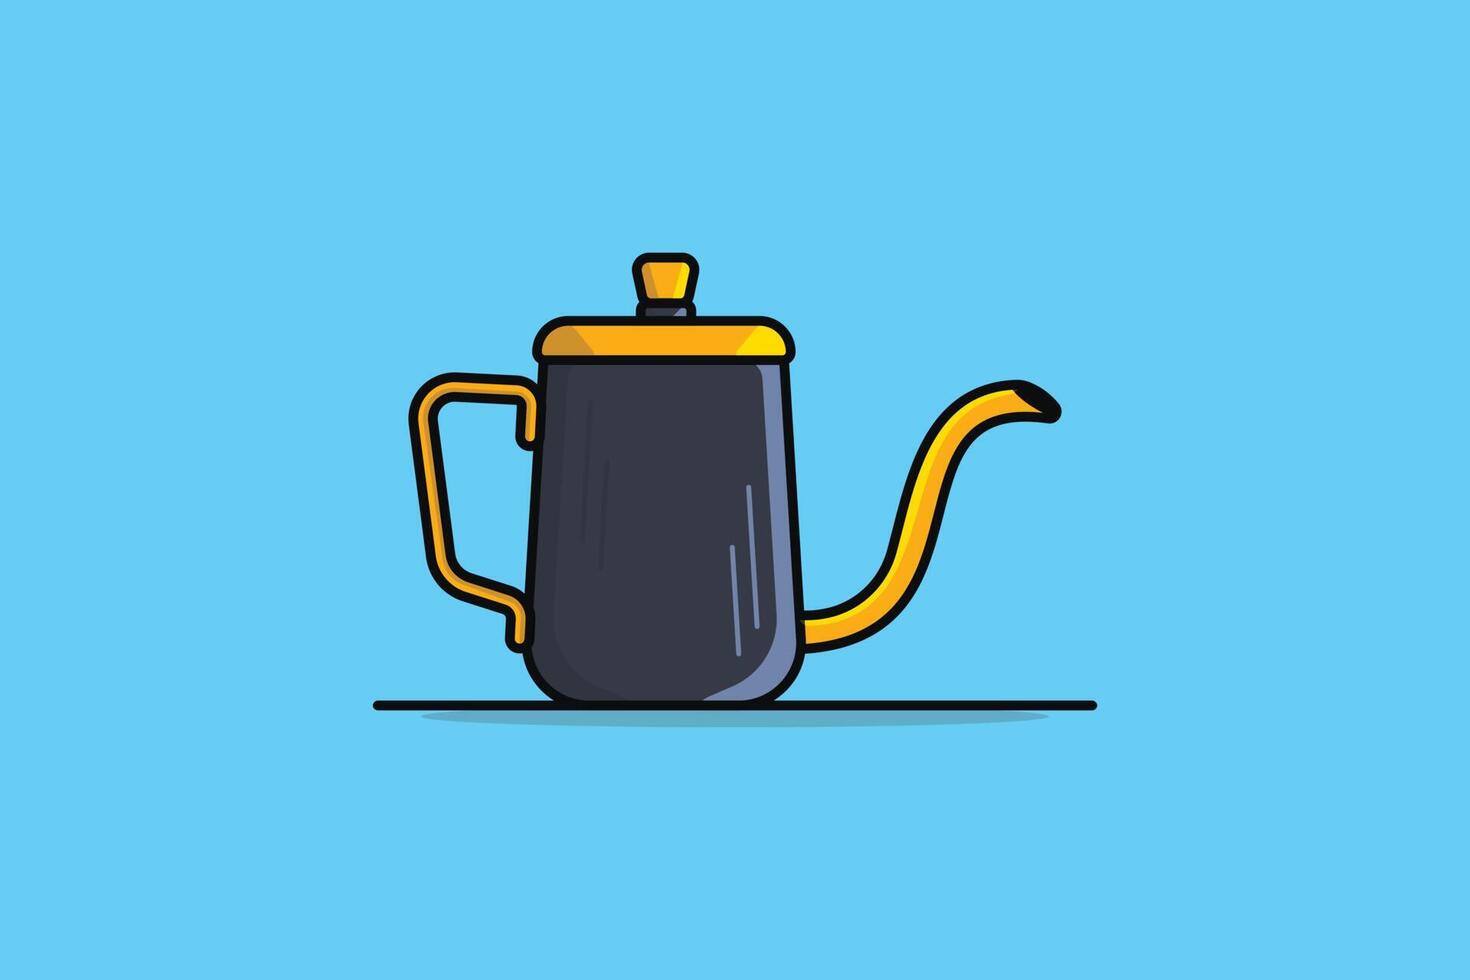 Metal Teapot vector illustration. Food and drink object icon concept. Breakfast Teapot with closed lid icon design on blue background. Pottery fictile, clay teakettle vector design with shadow.